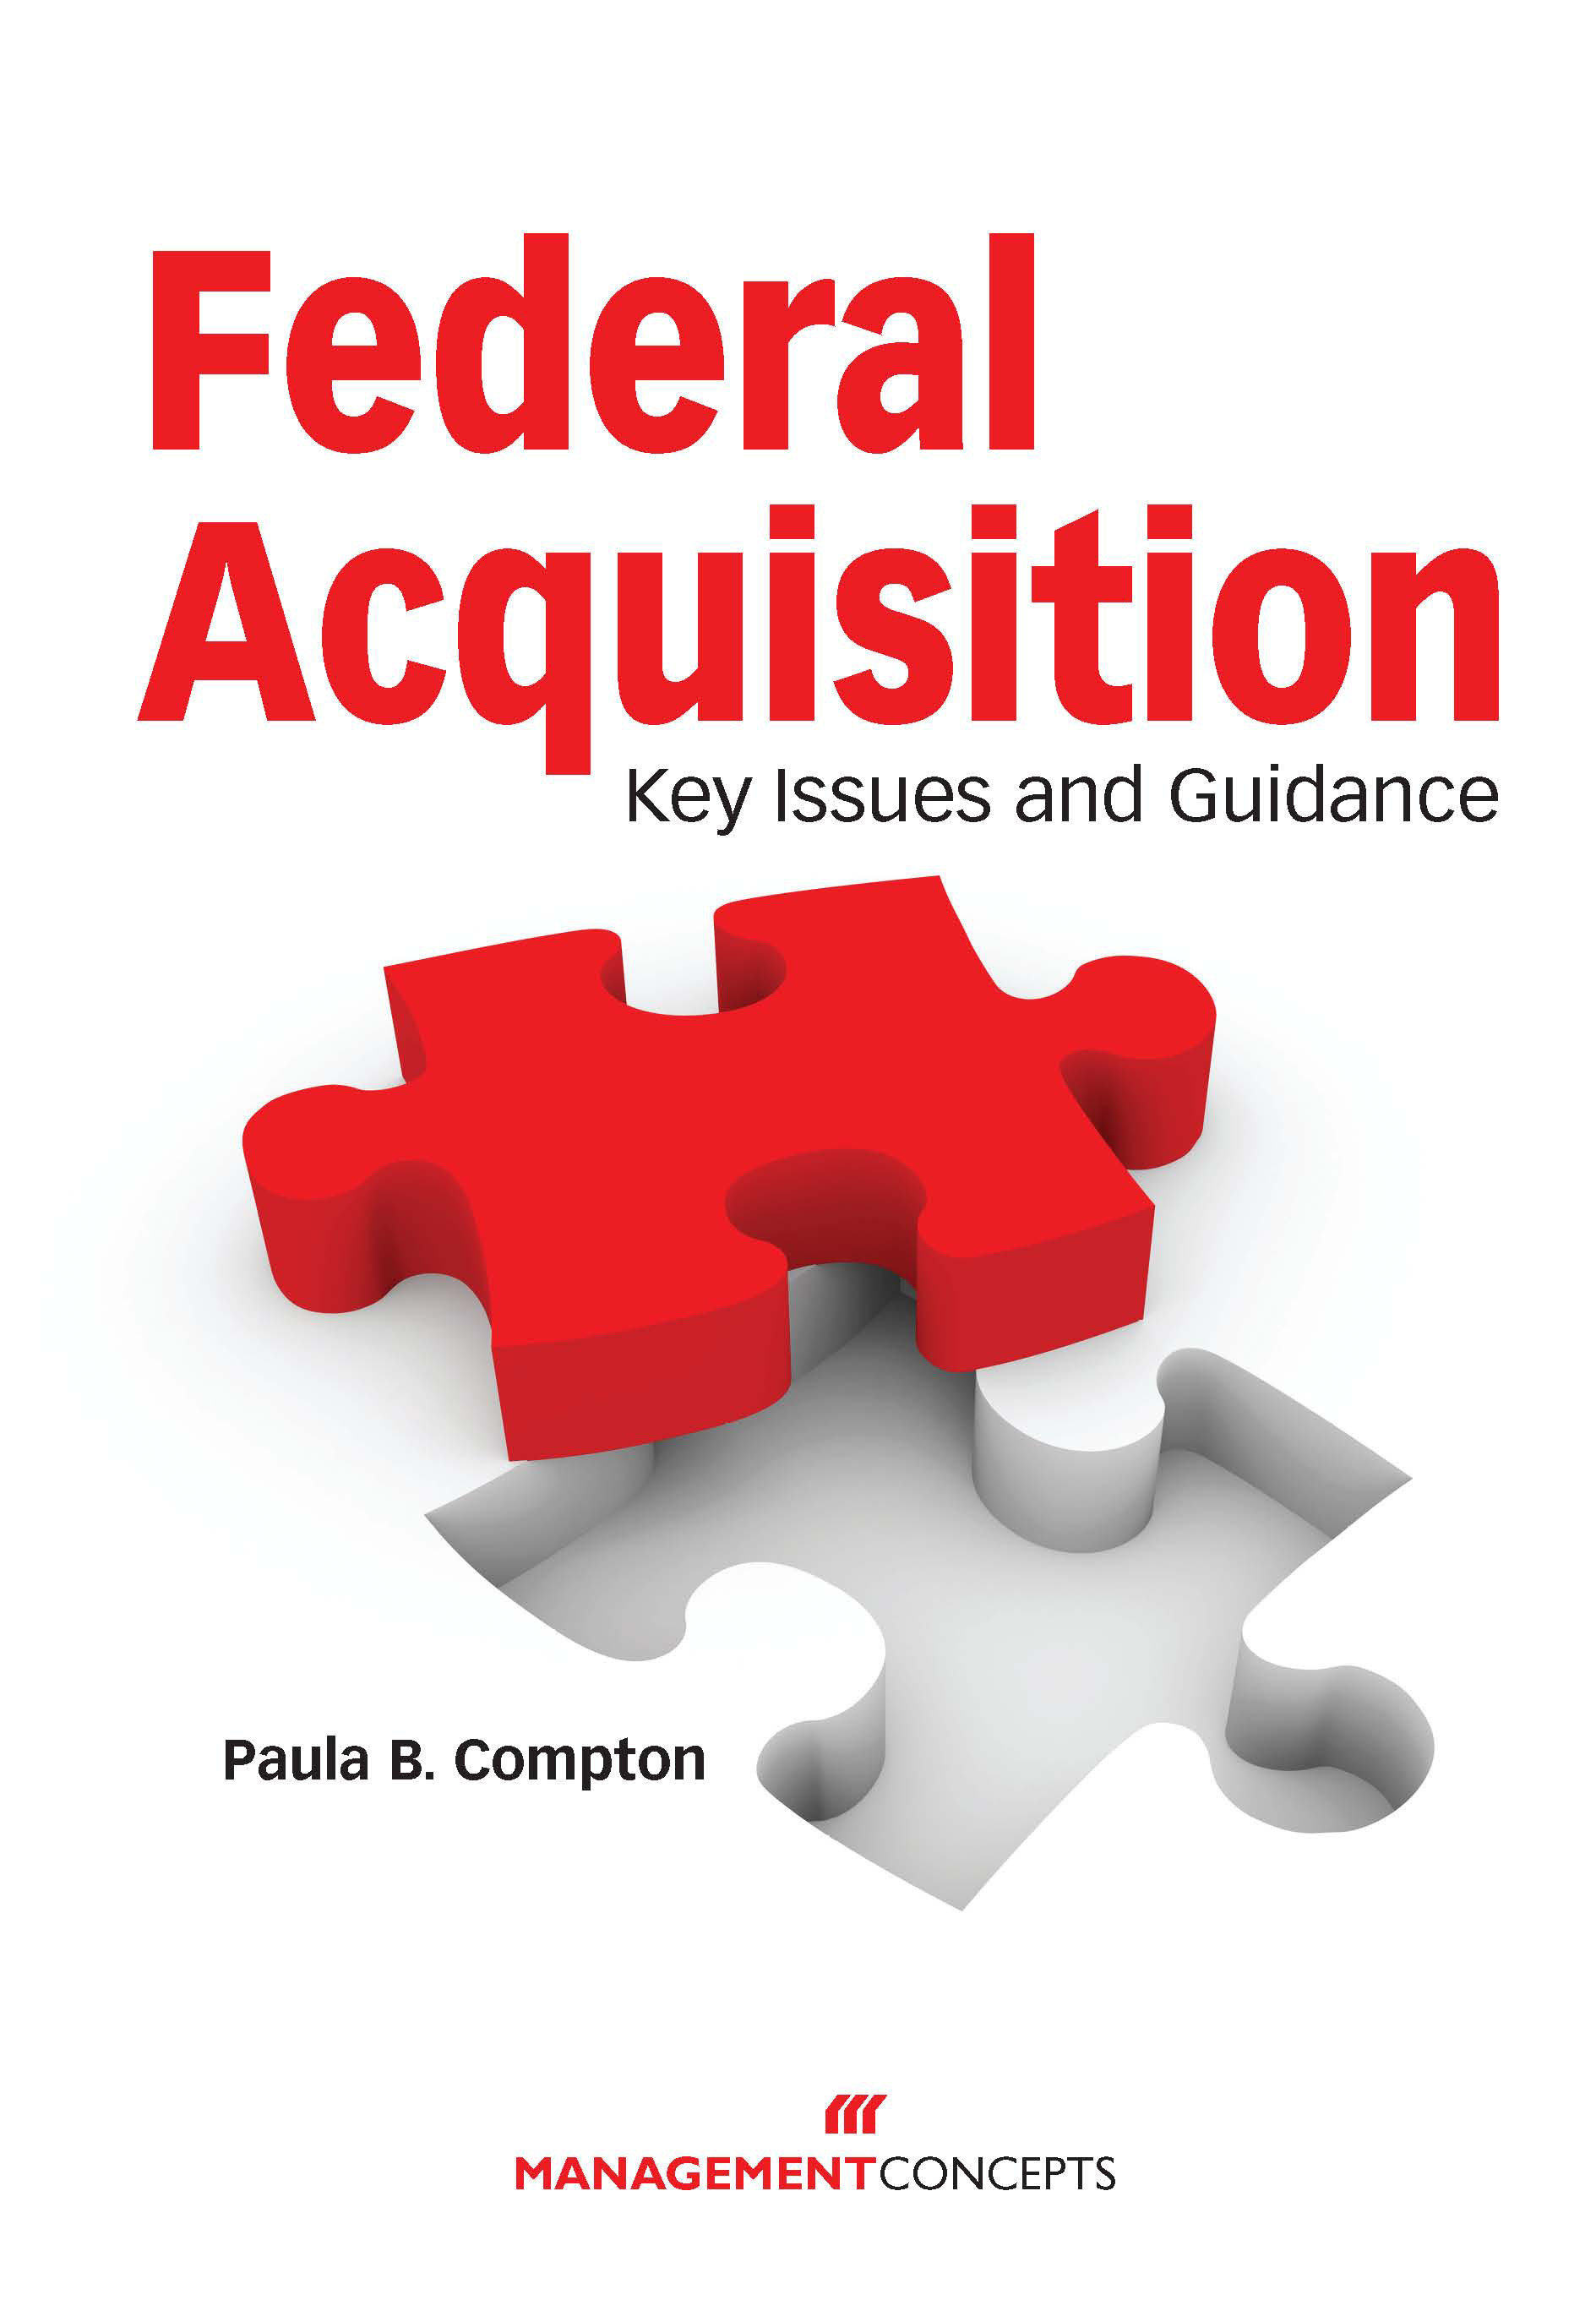 Federal Acquisition (Hardcover Book)